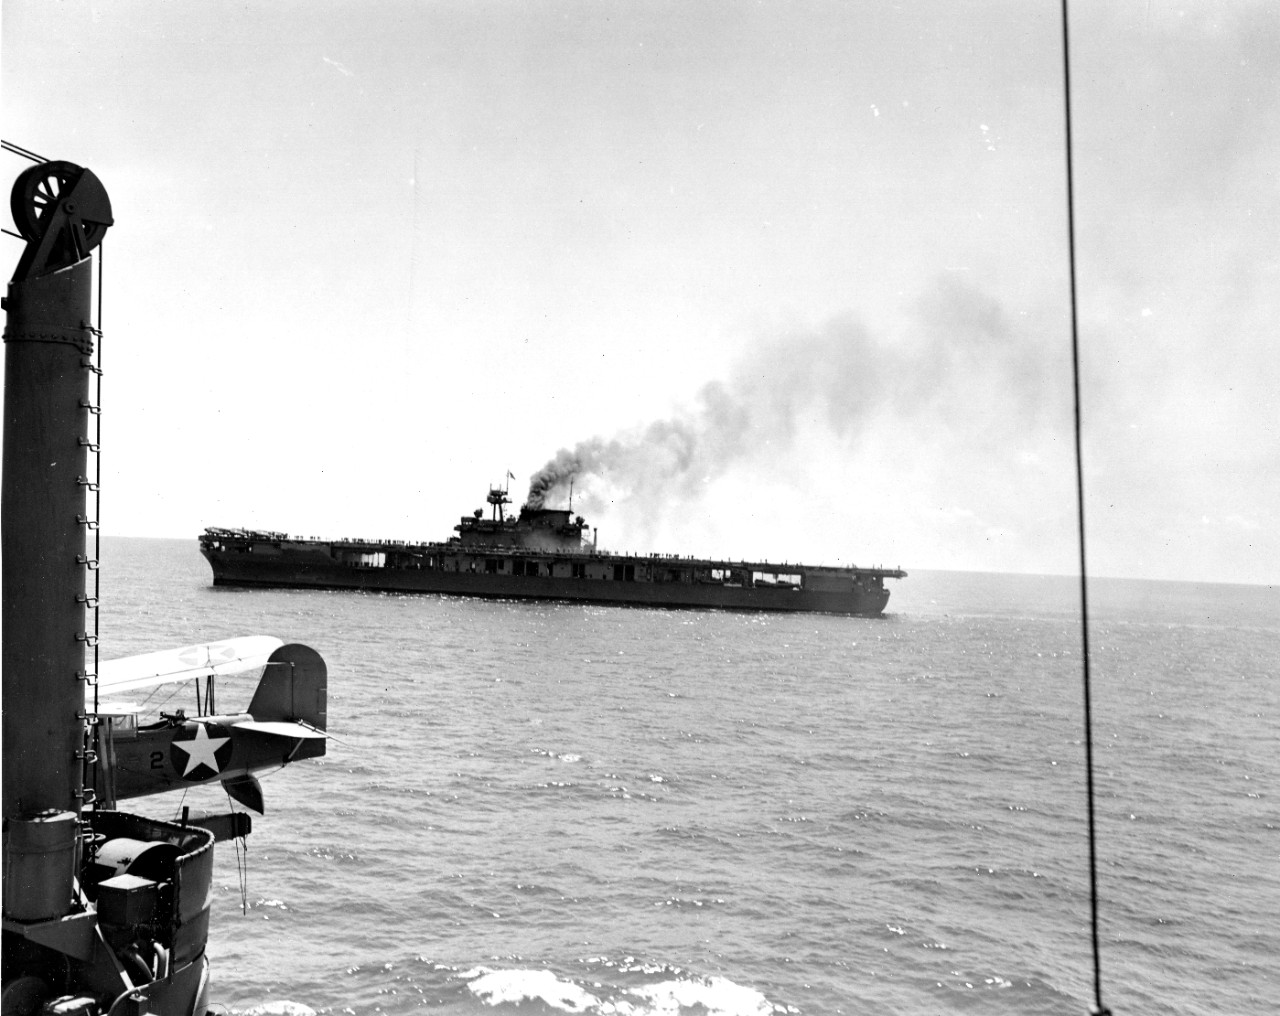 Photo #: 80-G-32299  Battle of Midway, June 1942